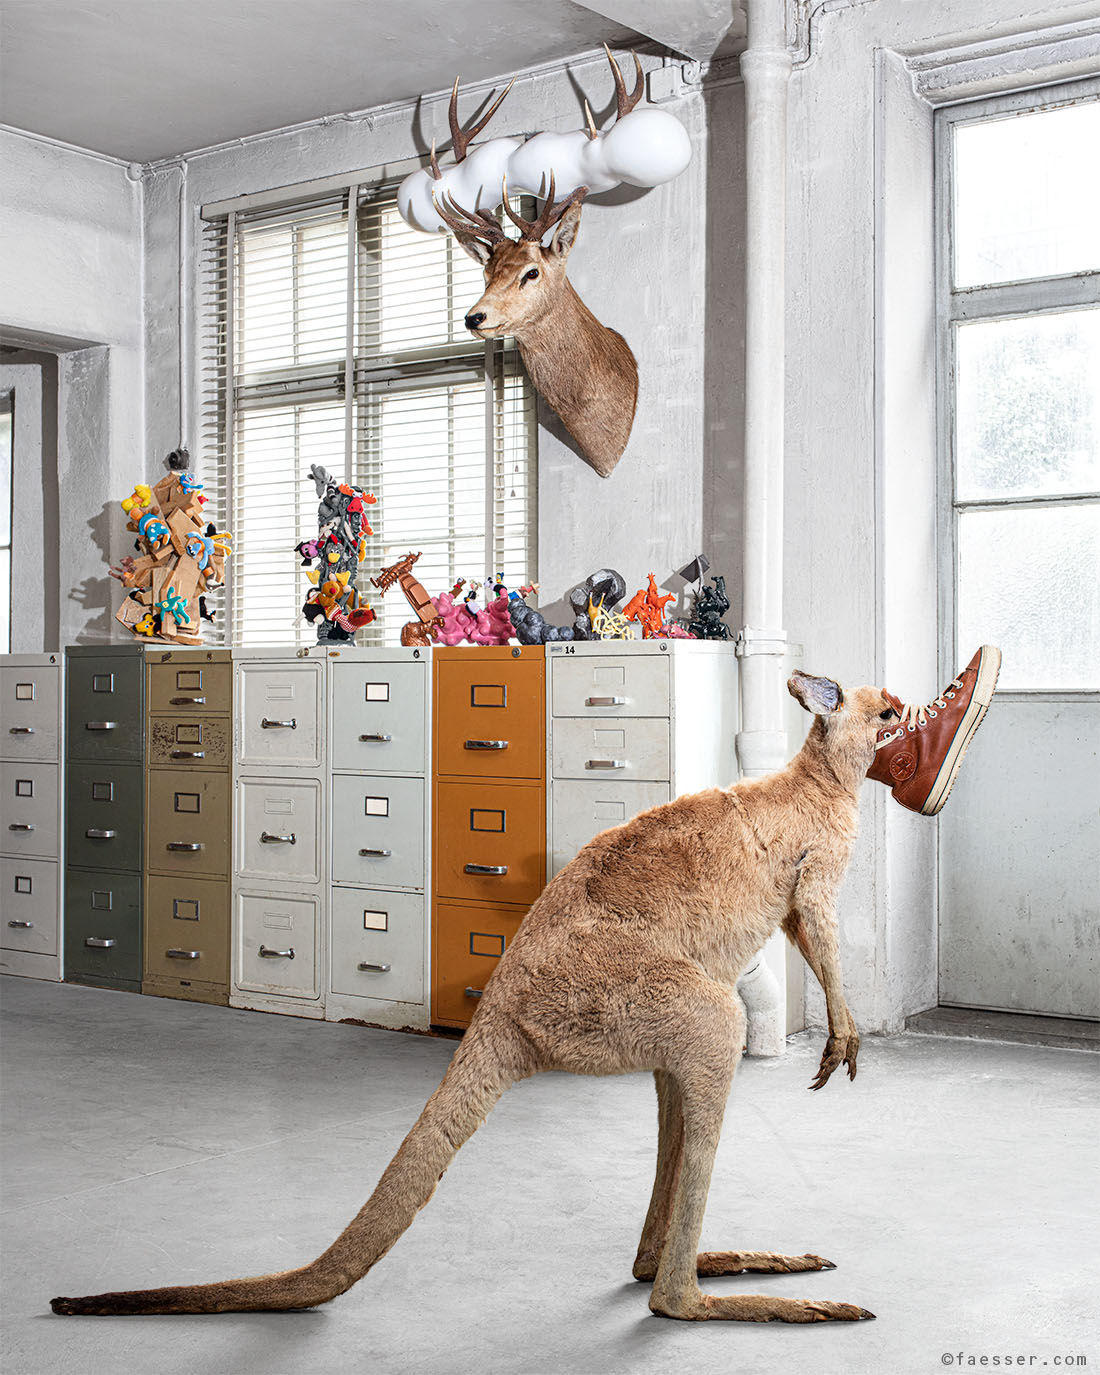 Stuffed kangaroo with corona protection at art studio Zurich; works of art as figurative sculptures and digital paintings; artist Roland Faesser, sculptor and painter 2008